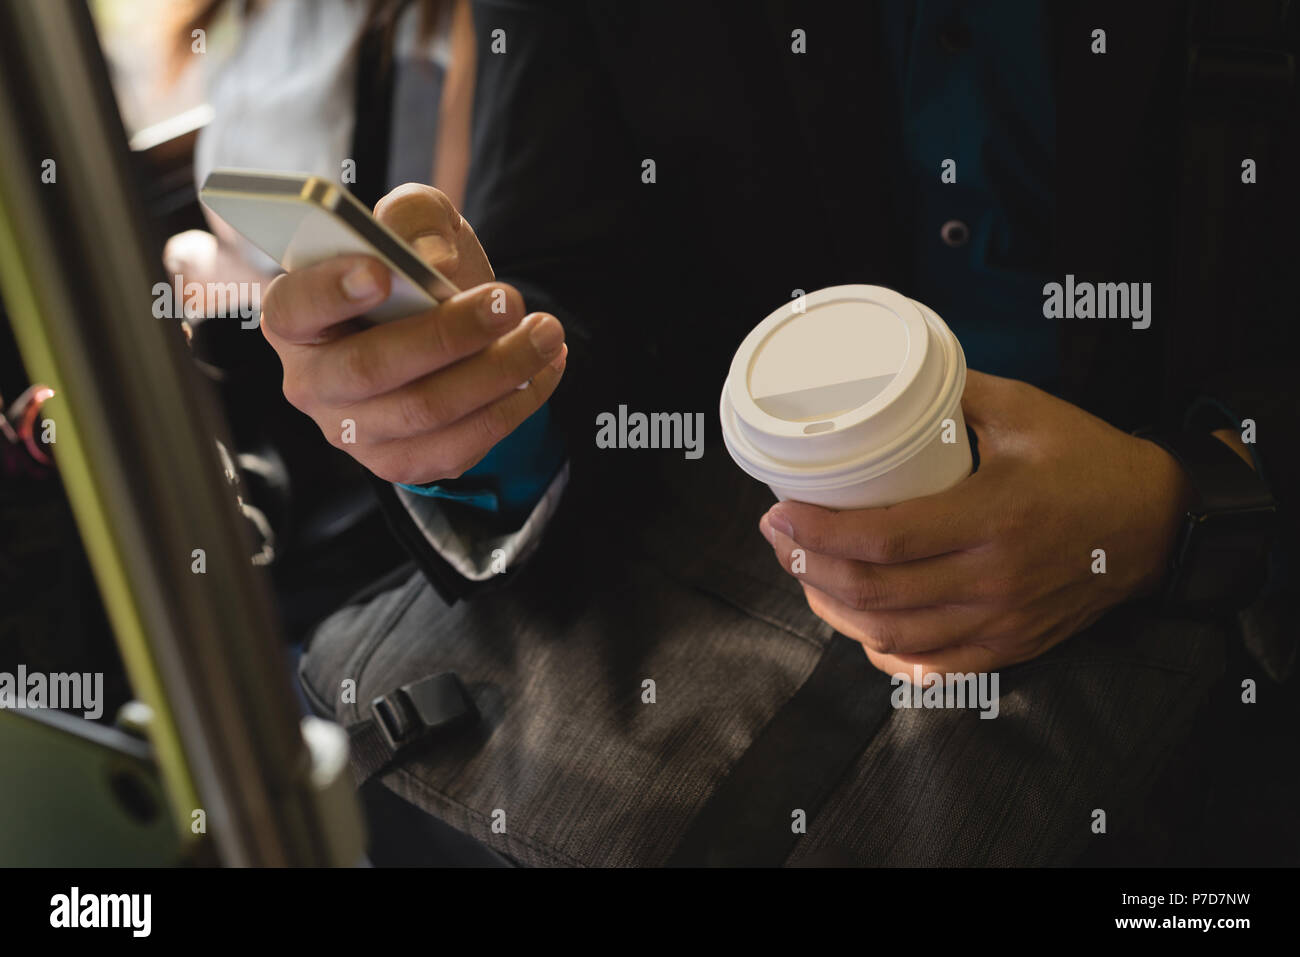 Businessman using mobile phone in bus Banque D'Images